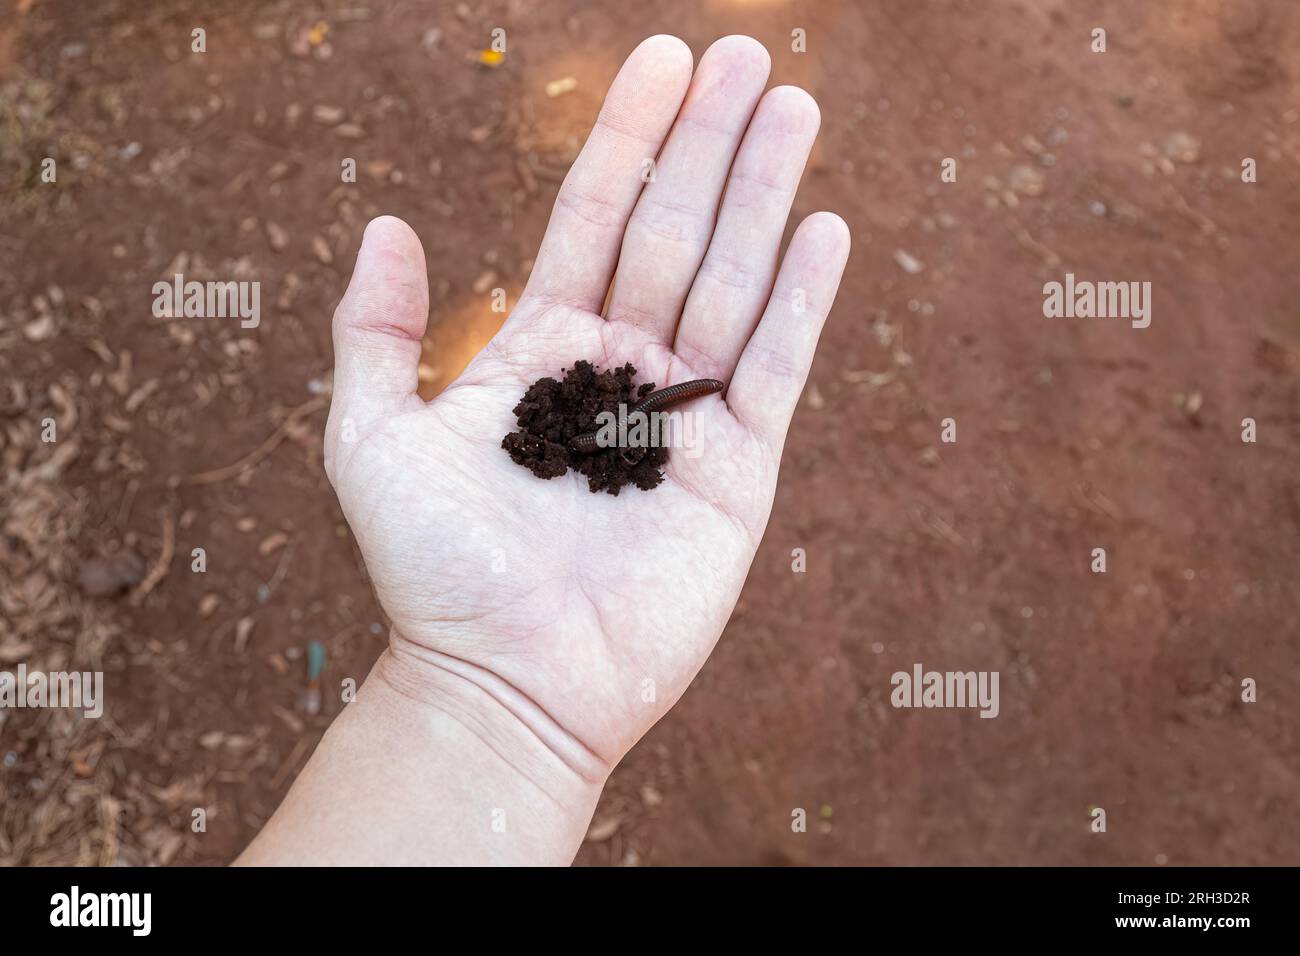 closeup of open clean white hand with dirt and earthworm Stock Photo